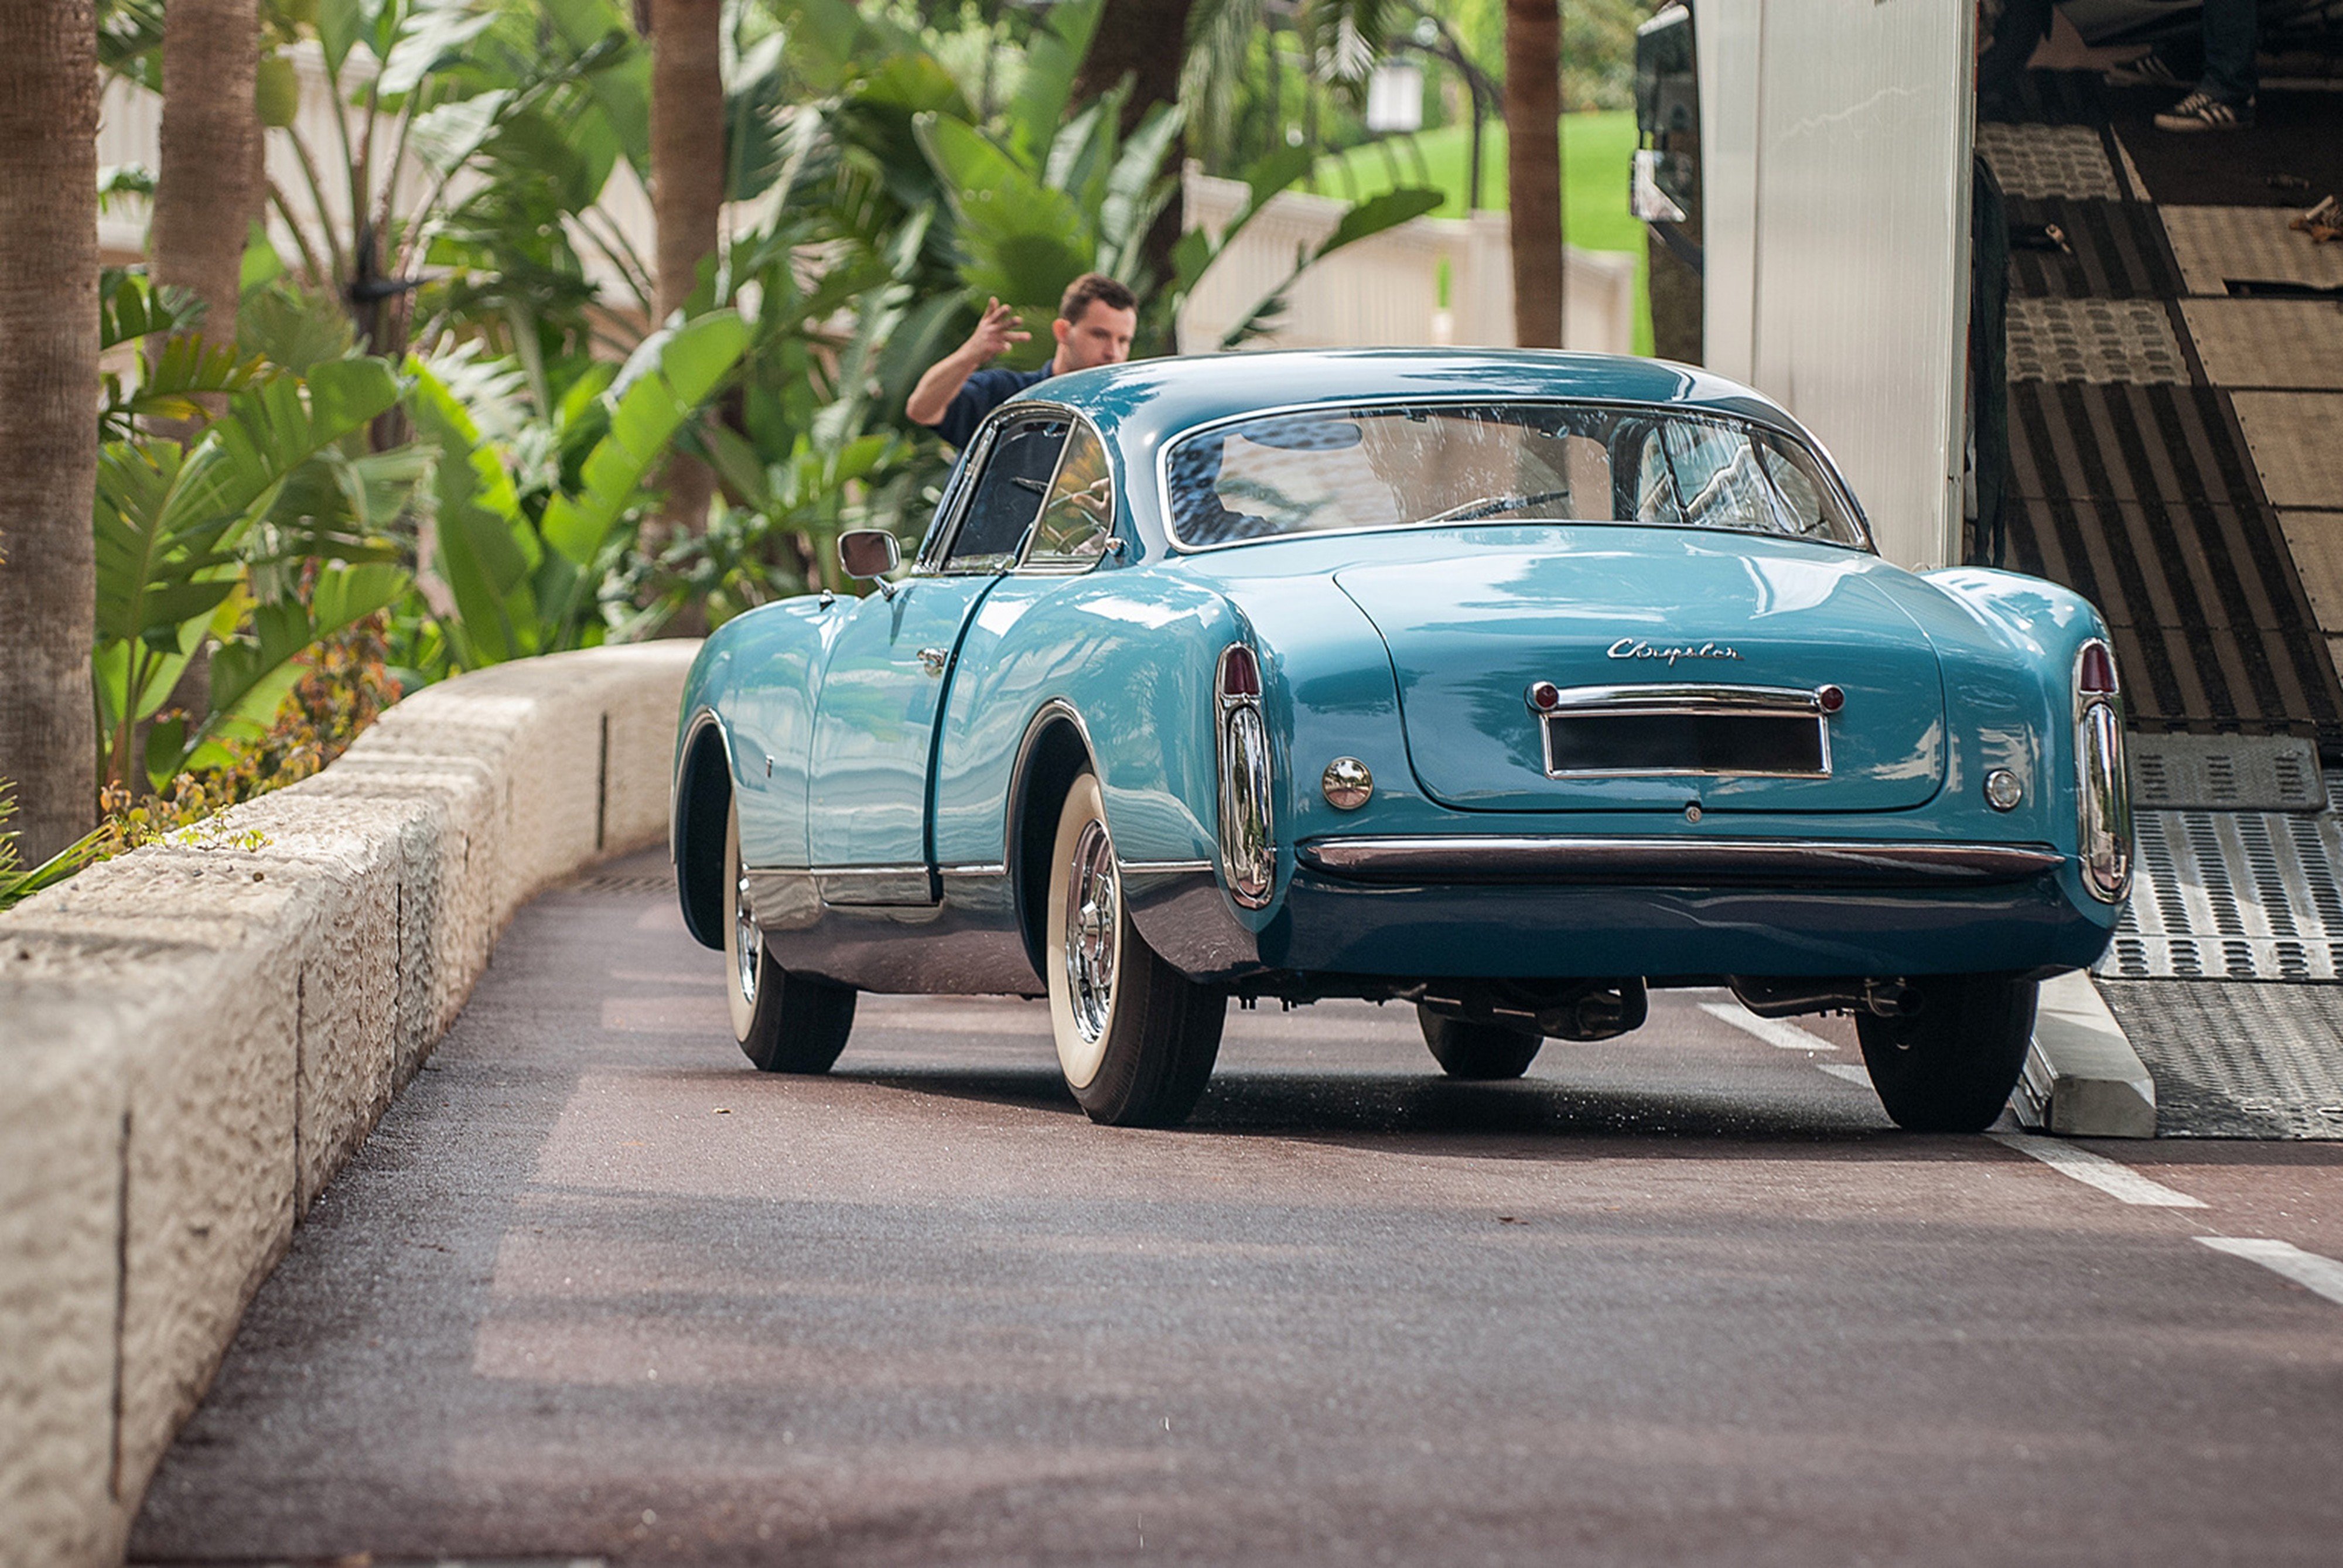 rmand039s, Auction, In, Monaco, Classic, Car, 1953, Chrysler, Ghia, Special, Coupa Wallpaper